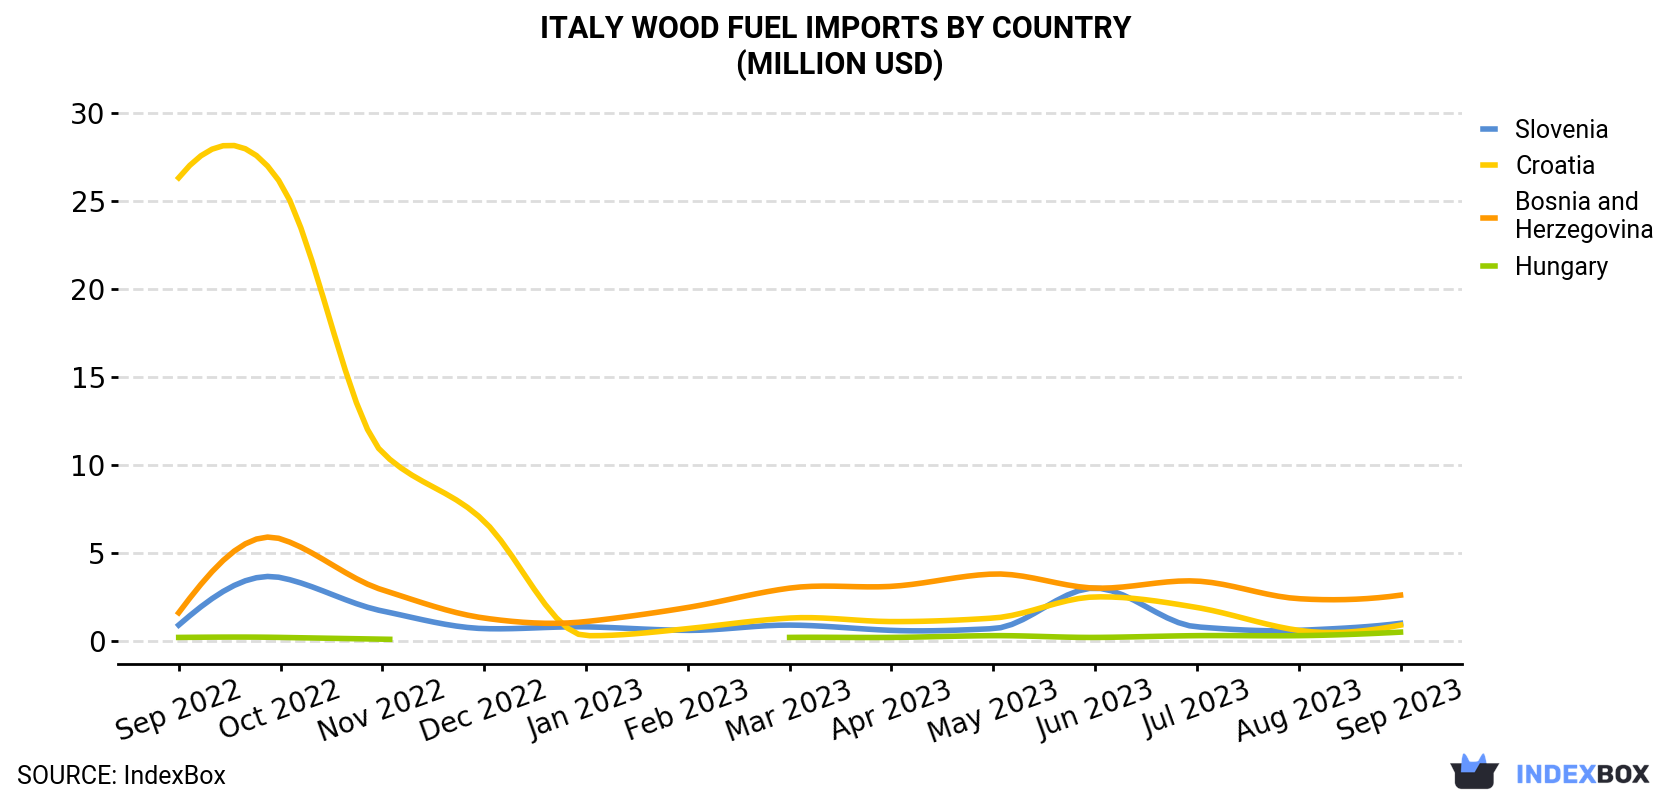 Italy Wood Fuel Imports By Country (Million USD)